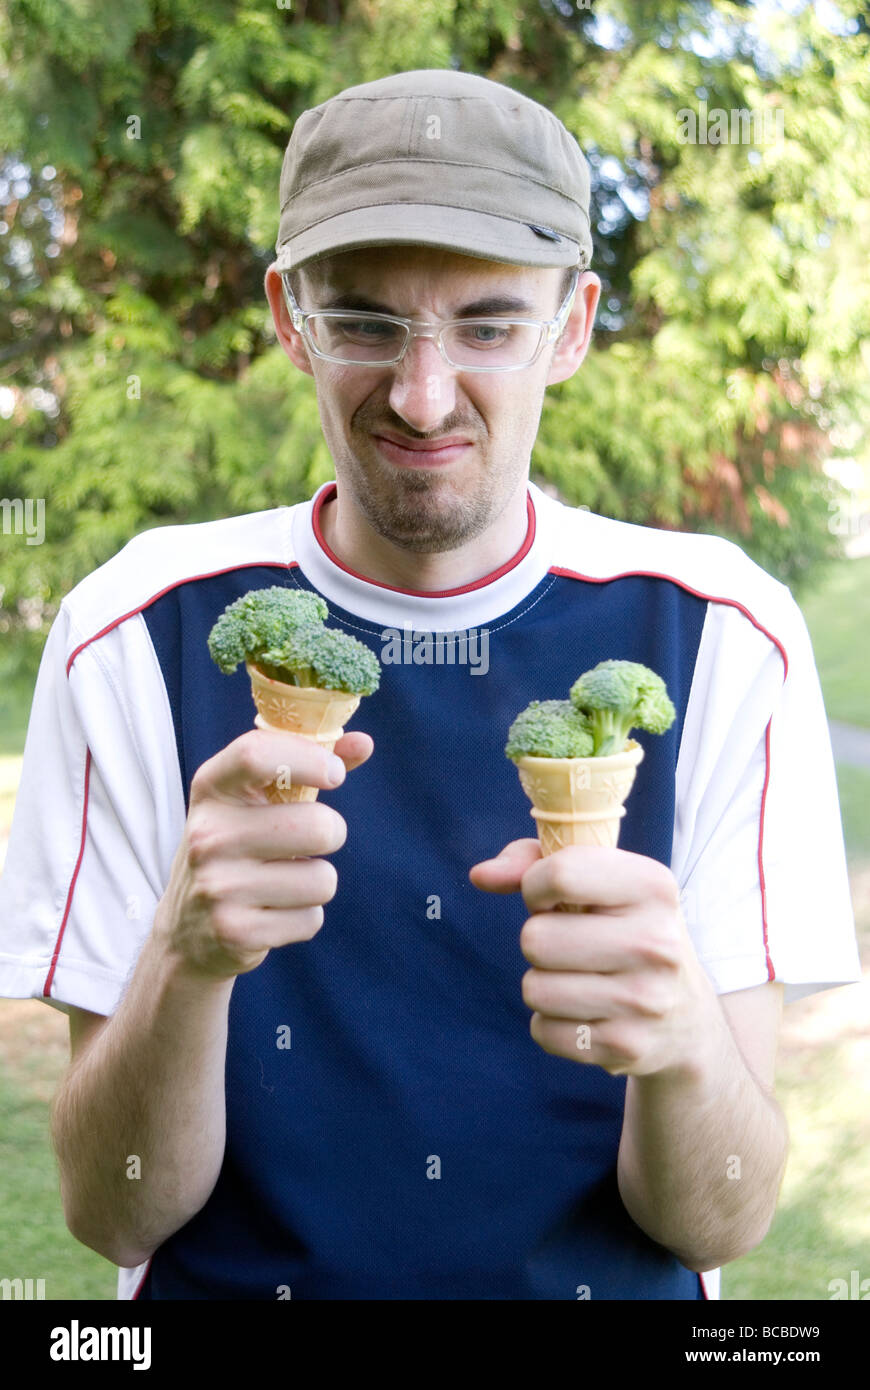 Young Man Making Face While Holding Ice Cream Cones Filled With Broccoli Stock Photo Alamy